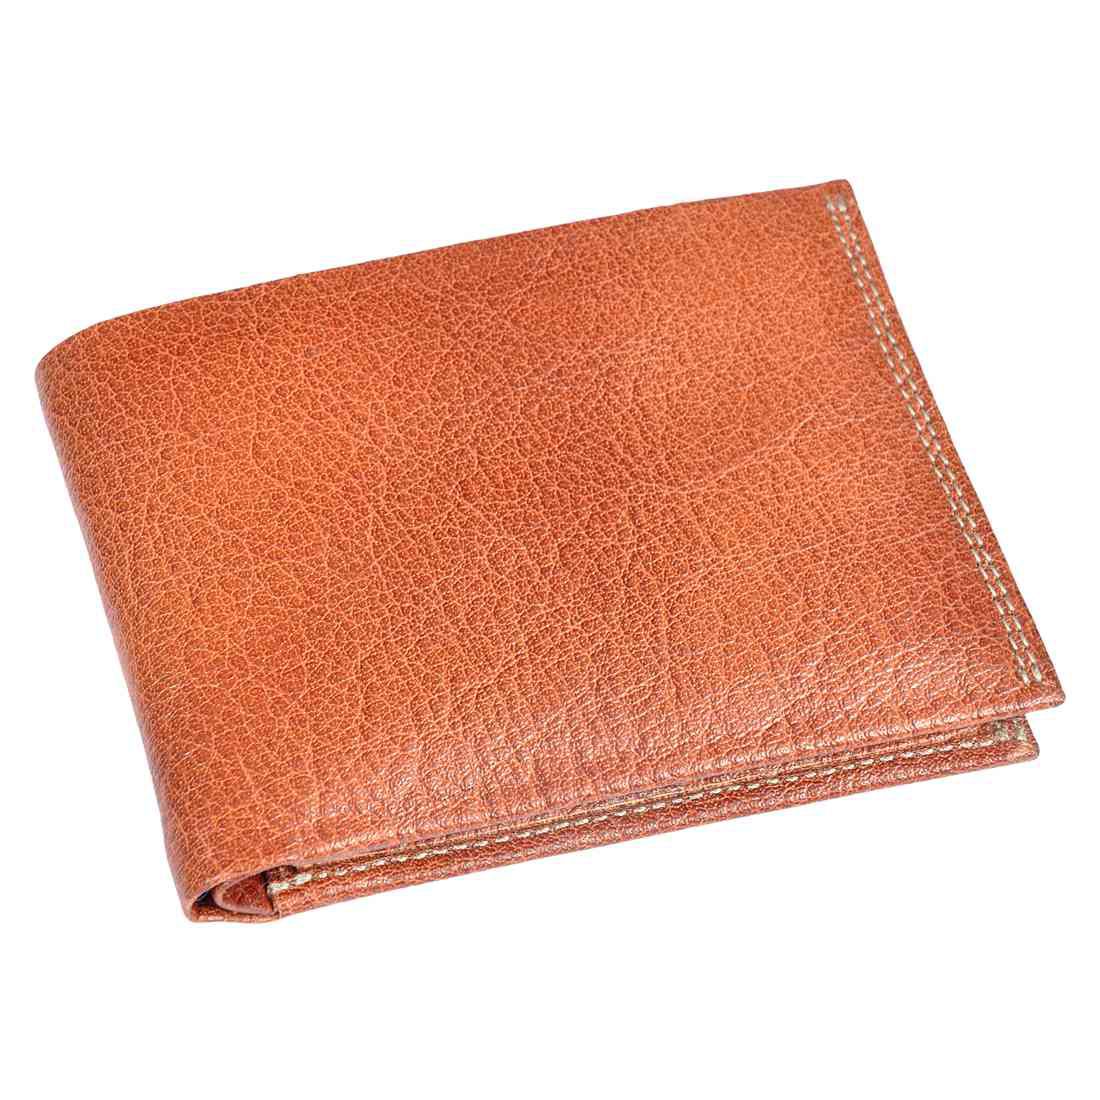 OHM New York Natural Grain Bill Fold Leather Wallet